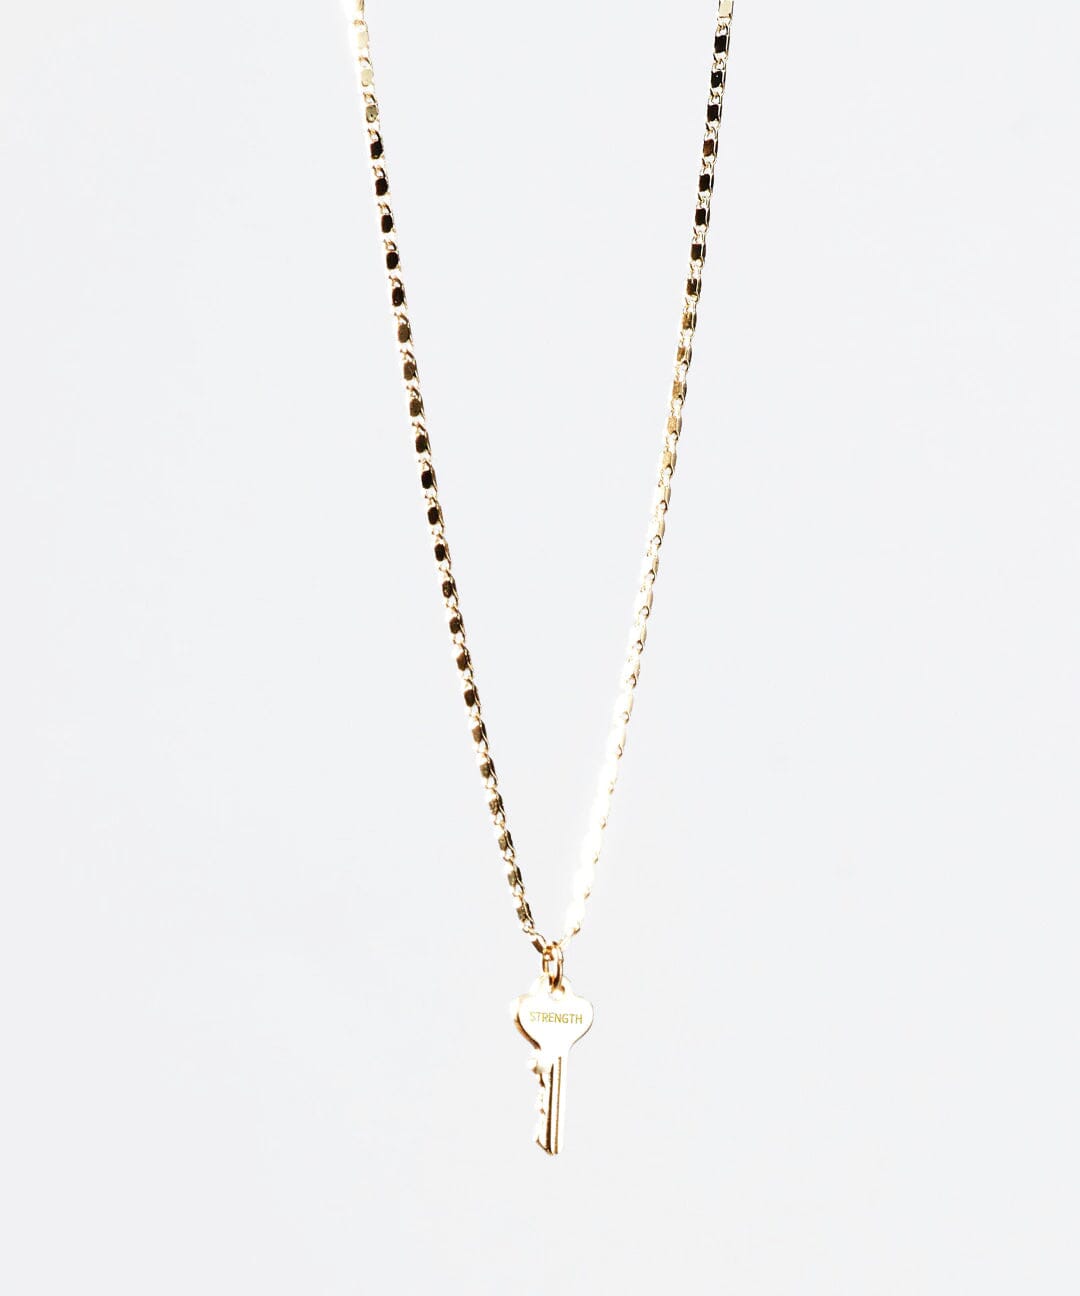 Petite Key Necklace Necklaces The Giving Keys STRENGTH GOLD 